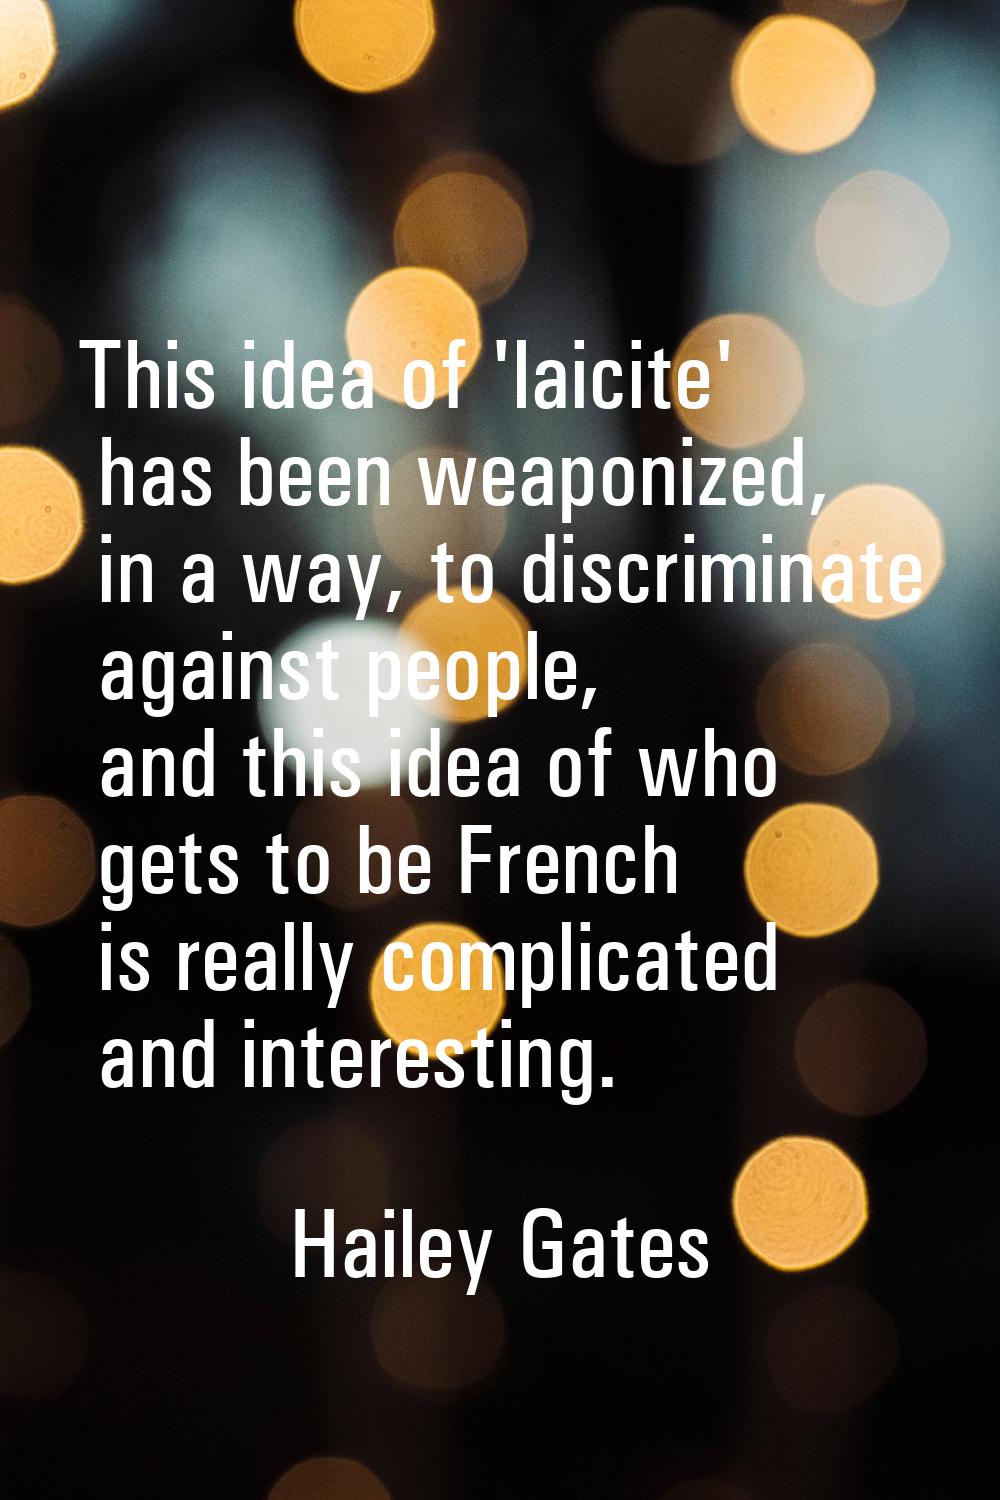 This idea of 'laicite' has been weaponized, in a way, to discriminate against people, and this idea